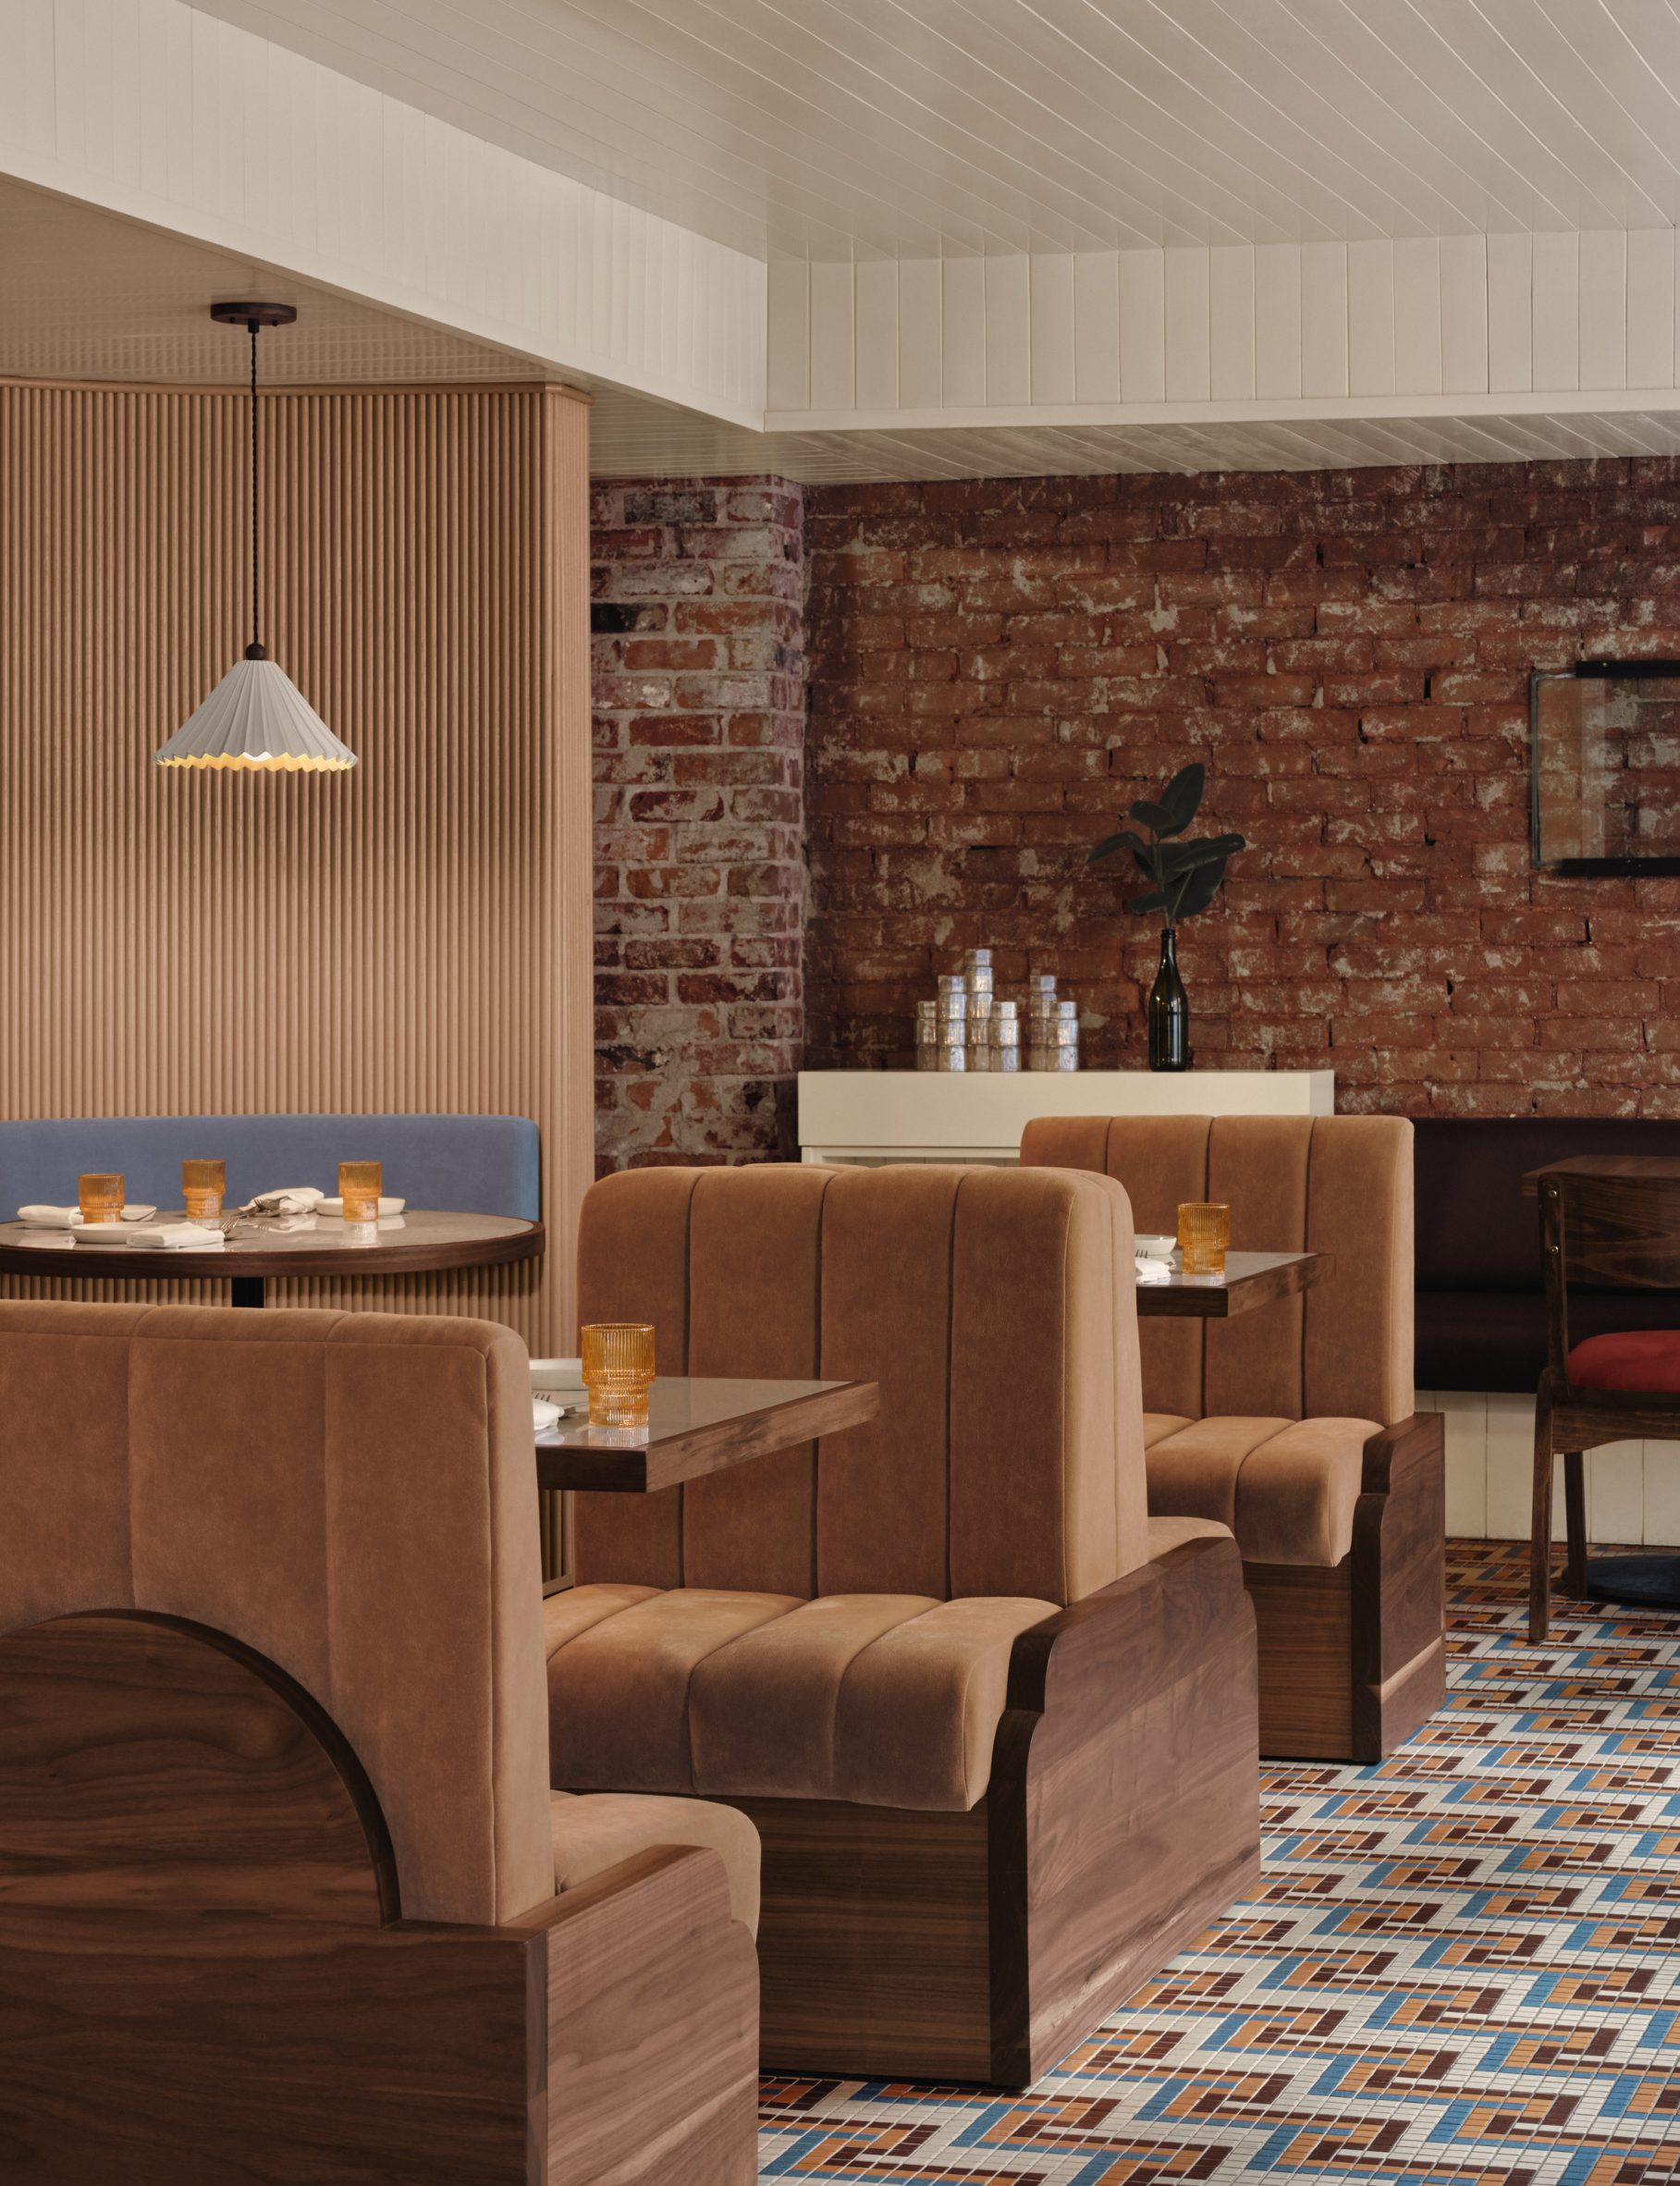 Exposed brickwork, natural walnut and cognac-toned upholstery within a restaurant interior